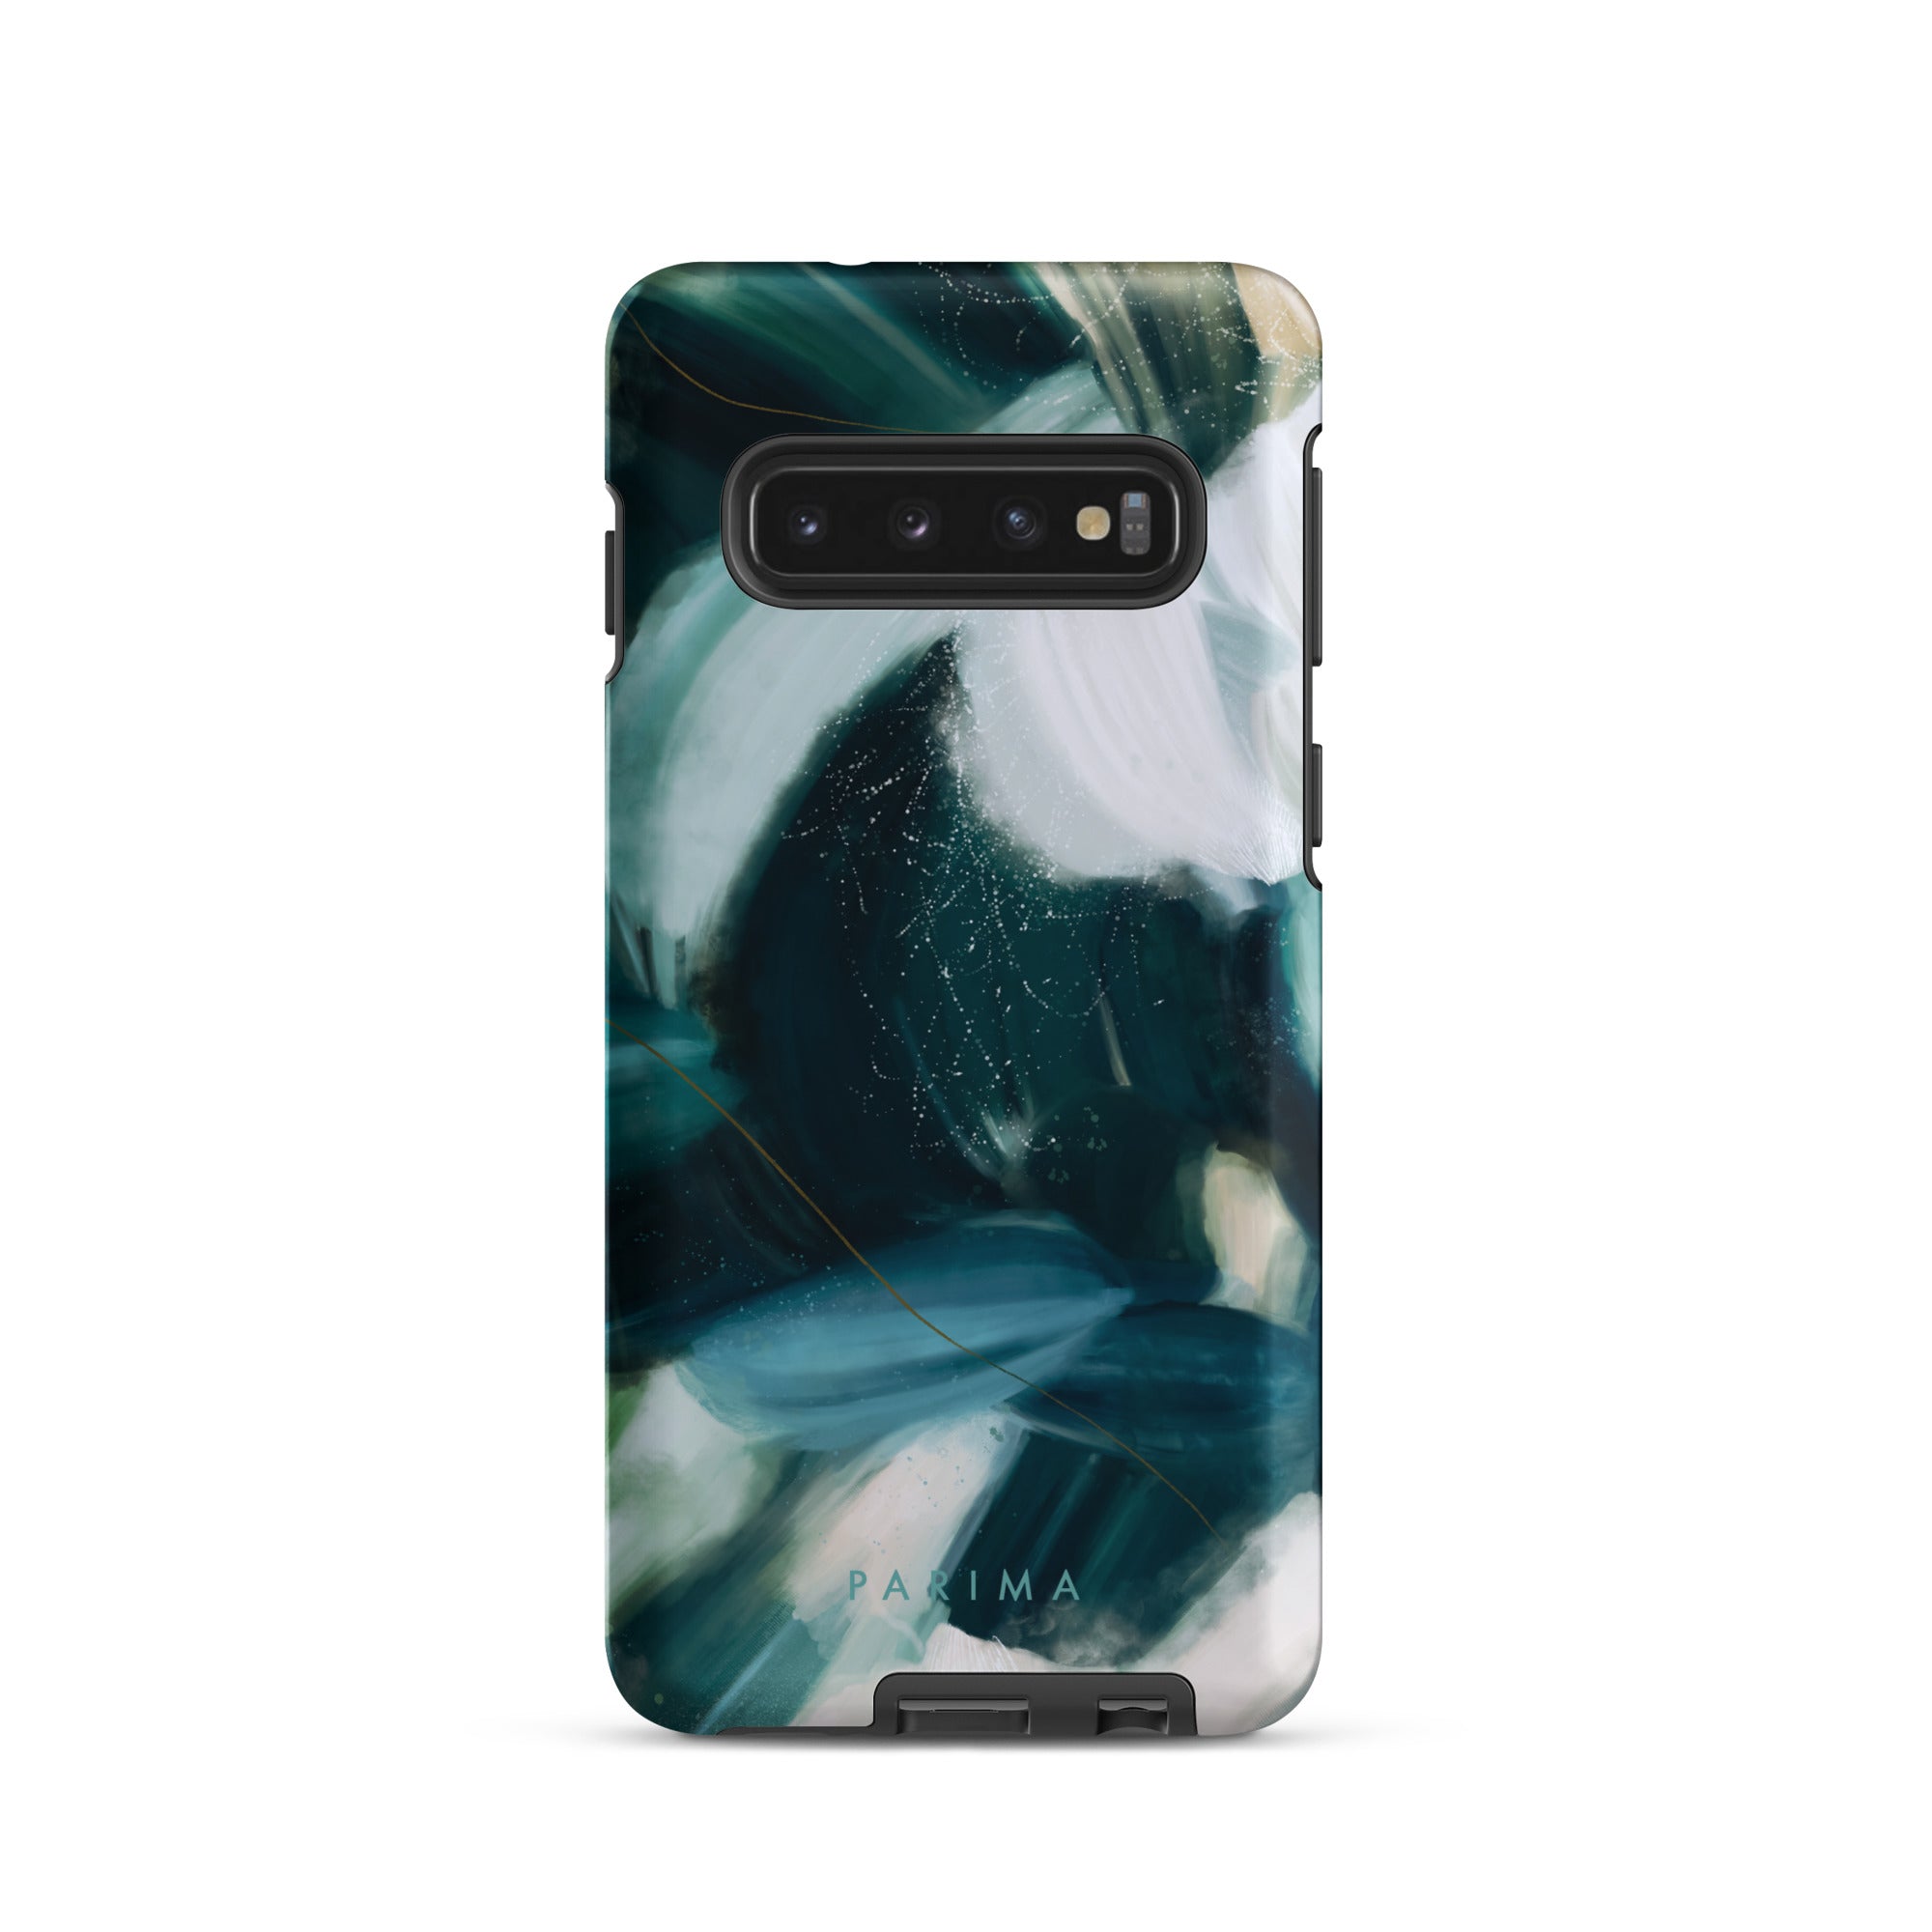 Caspian, blue and teal abstract art on Samsung Galaxy S10 tough case by Parima Studio